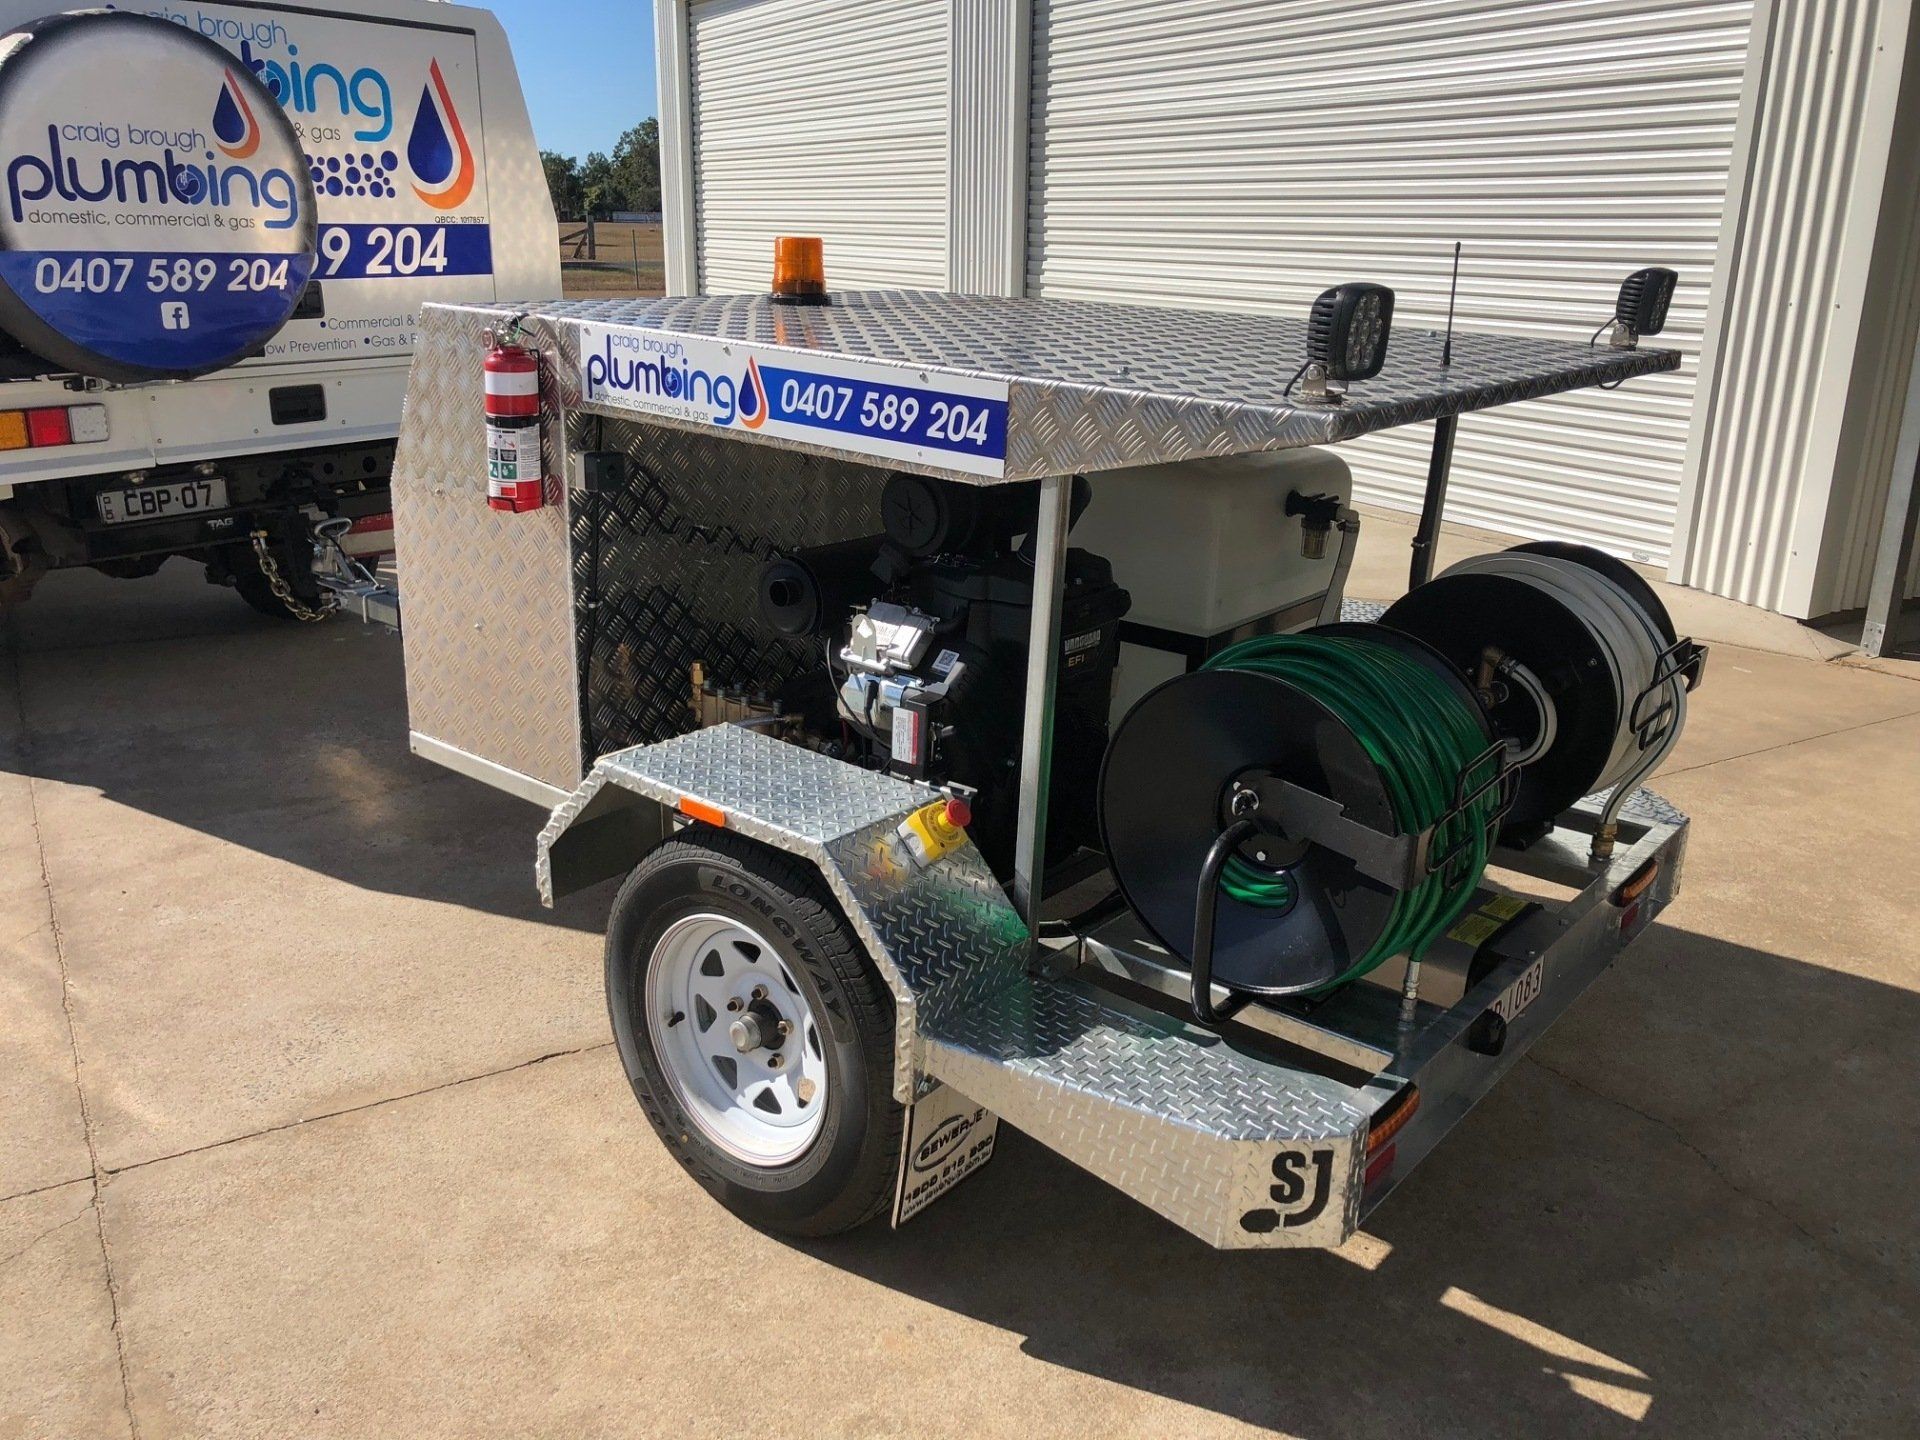 Jetter System — Plumbing And Gas Services In Bundaberg, QLD